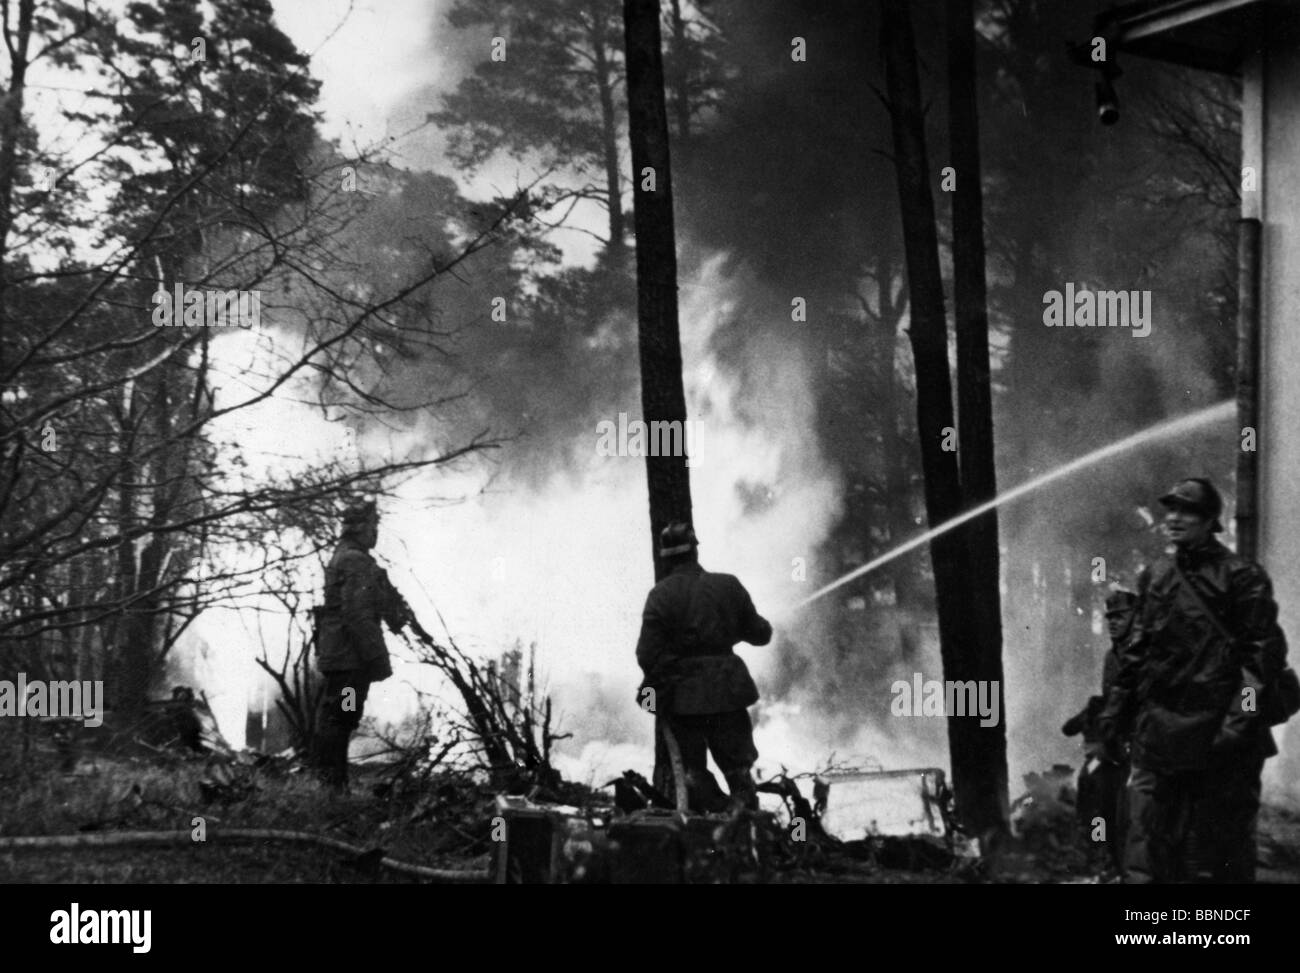 events, Second World War / WWII, Finland, fire being extinguished after bomb has fallen in wood, 20th century, fire brigade, firefighting, firemen, Winter War 1939 - 1940, Stock Photo